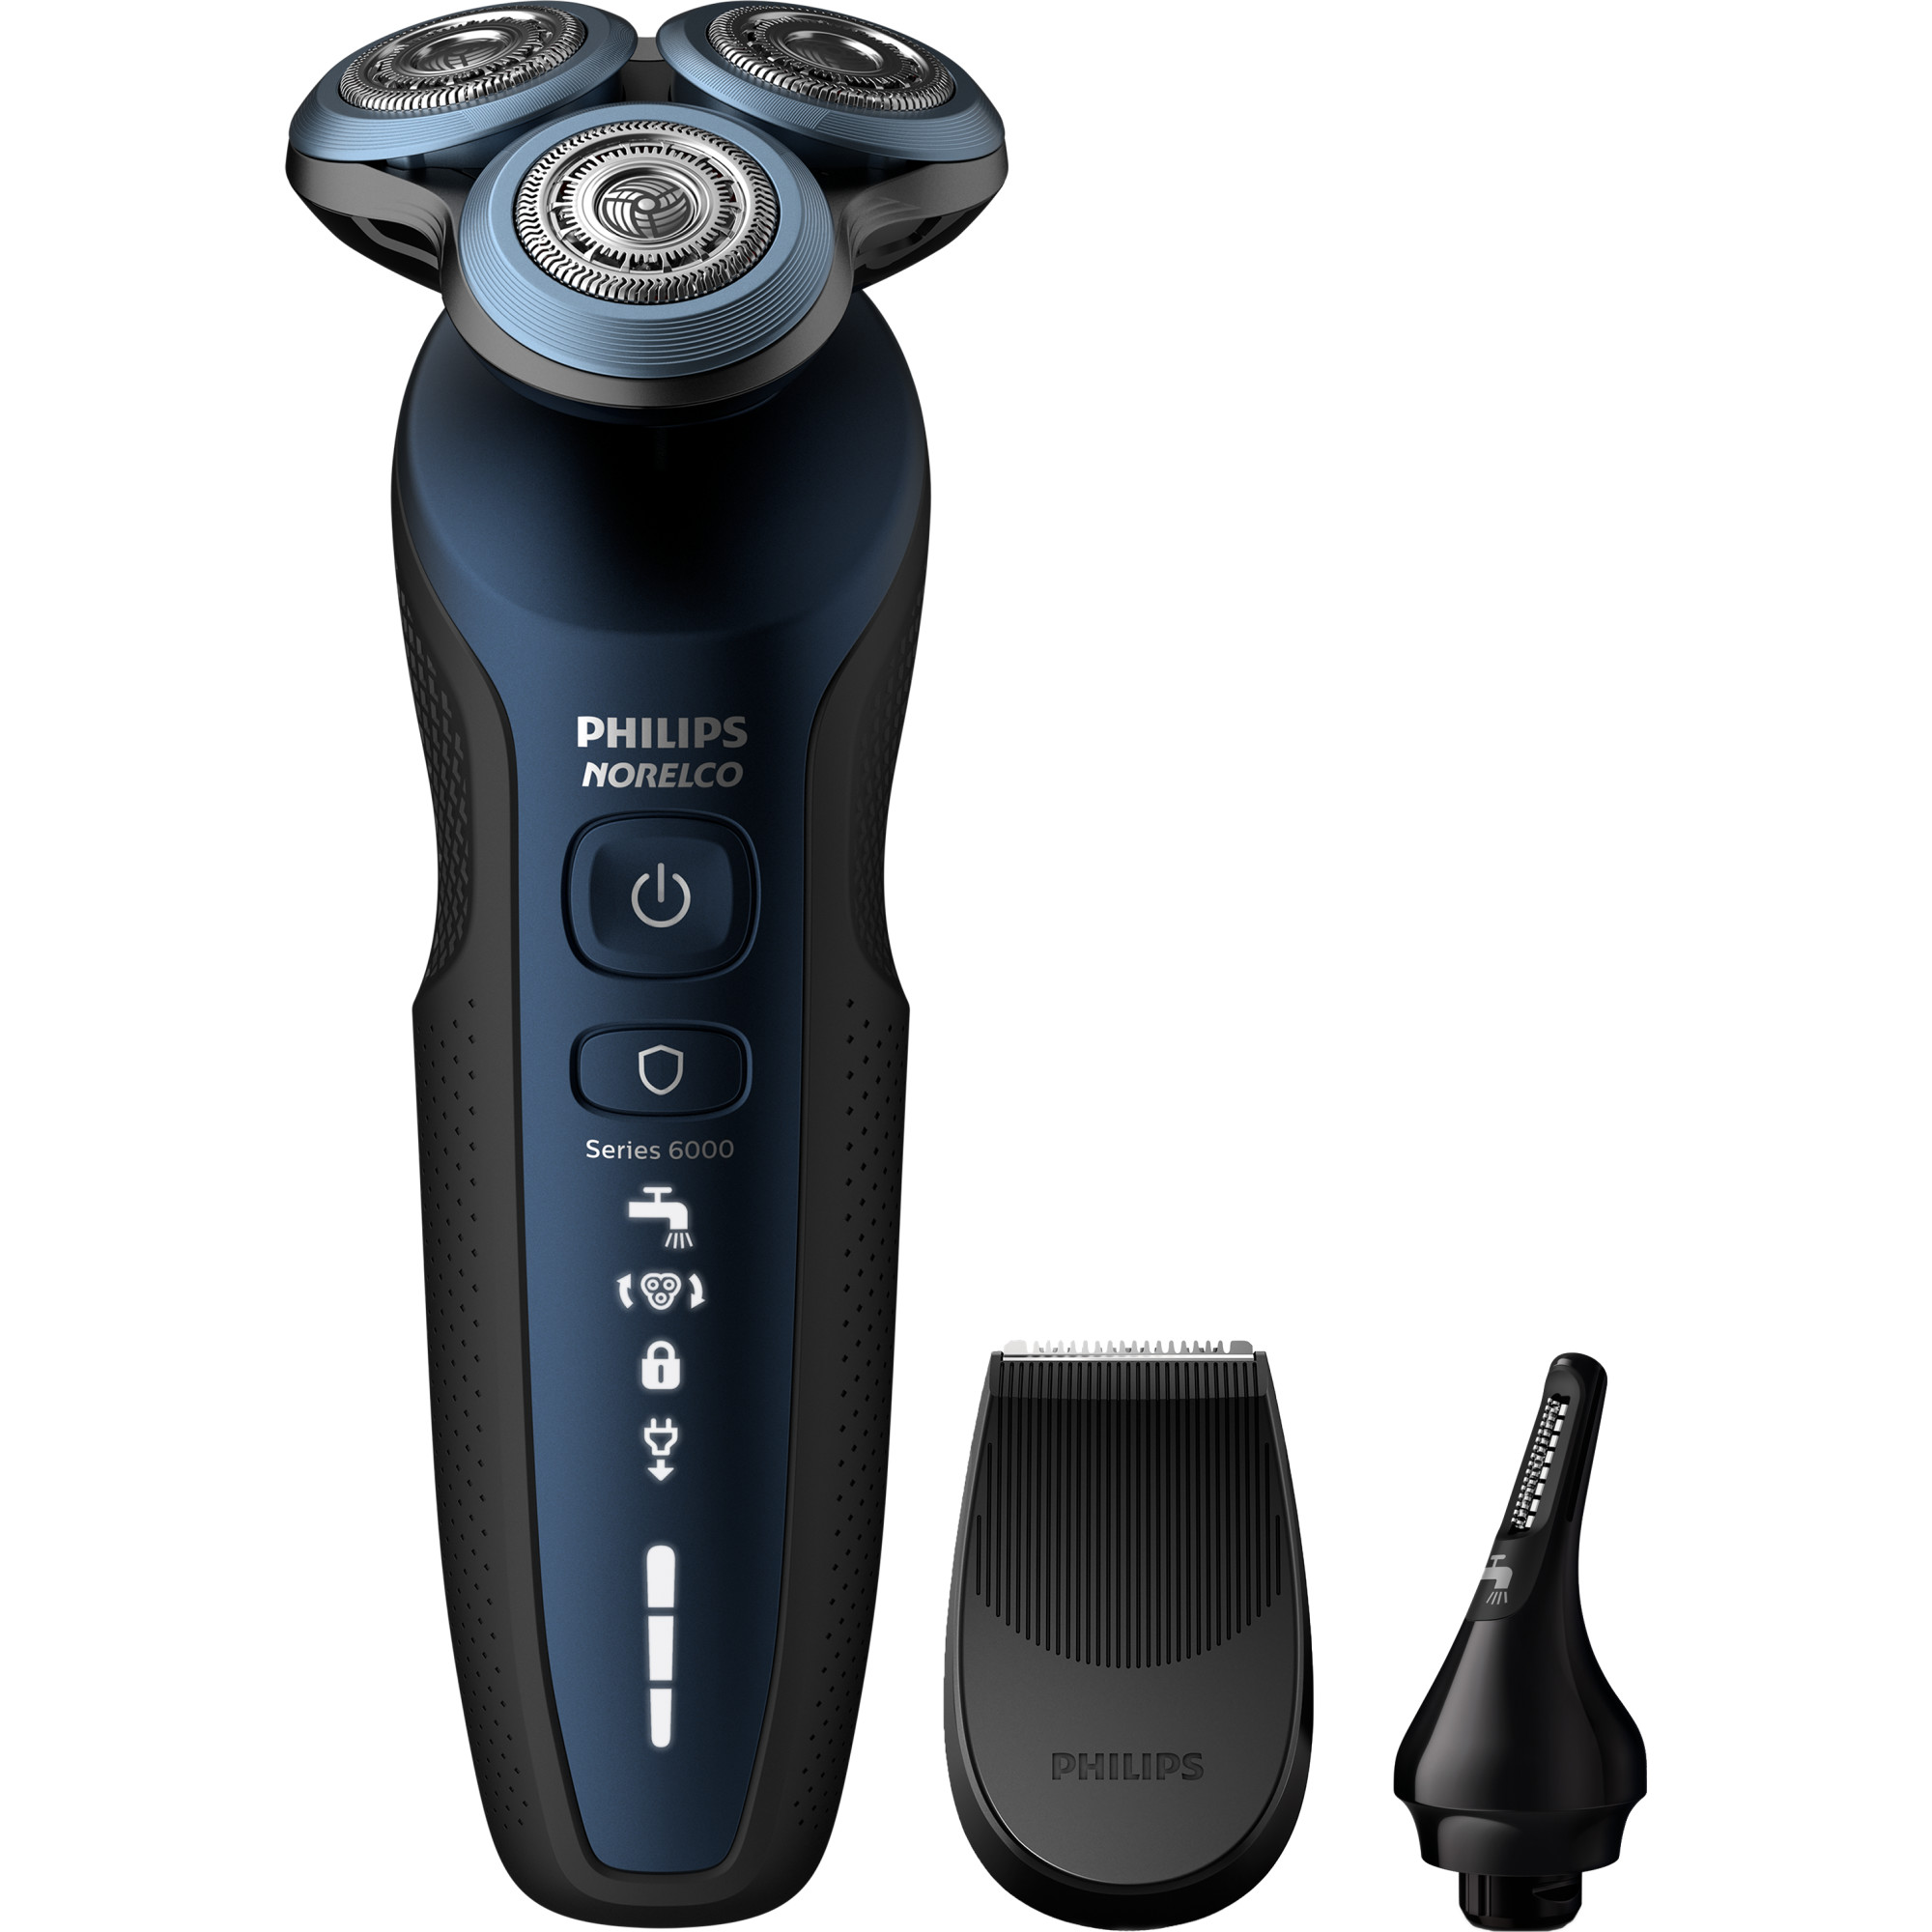 Philips Norelco Electric Shaver 6850 with Precision Trimmer and Nose Trimmer Attachment, S6850/85 - image 1 of 7